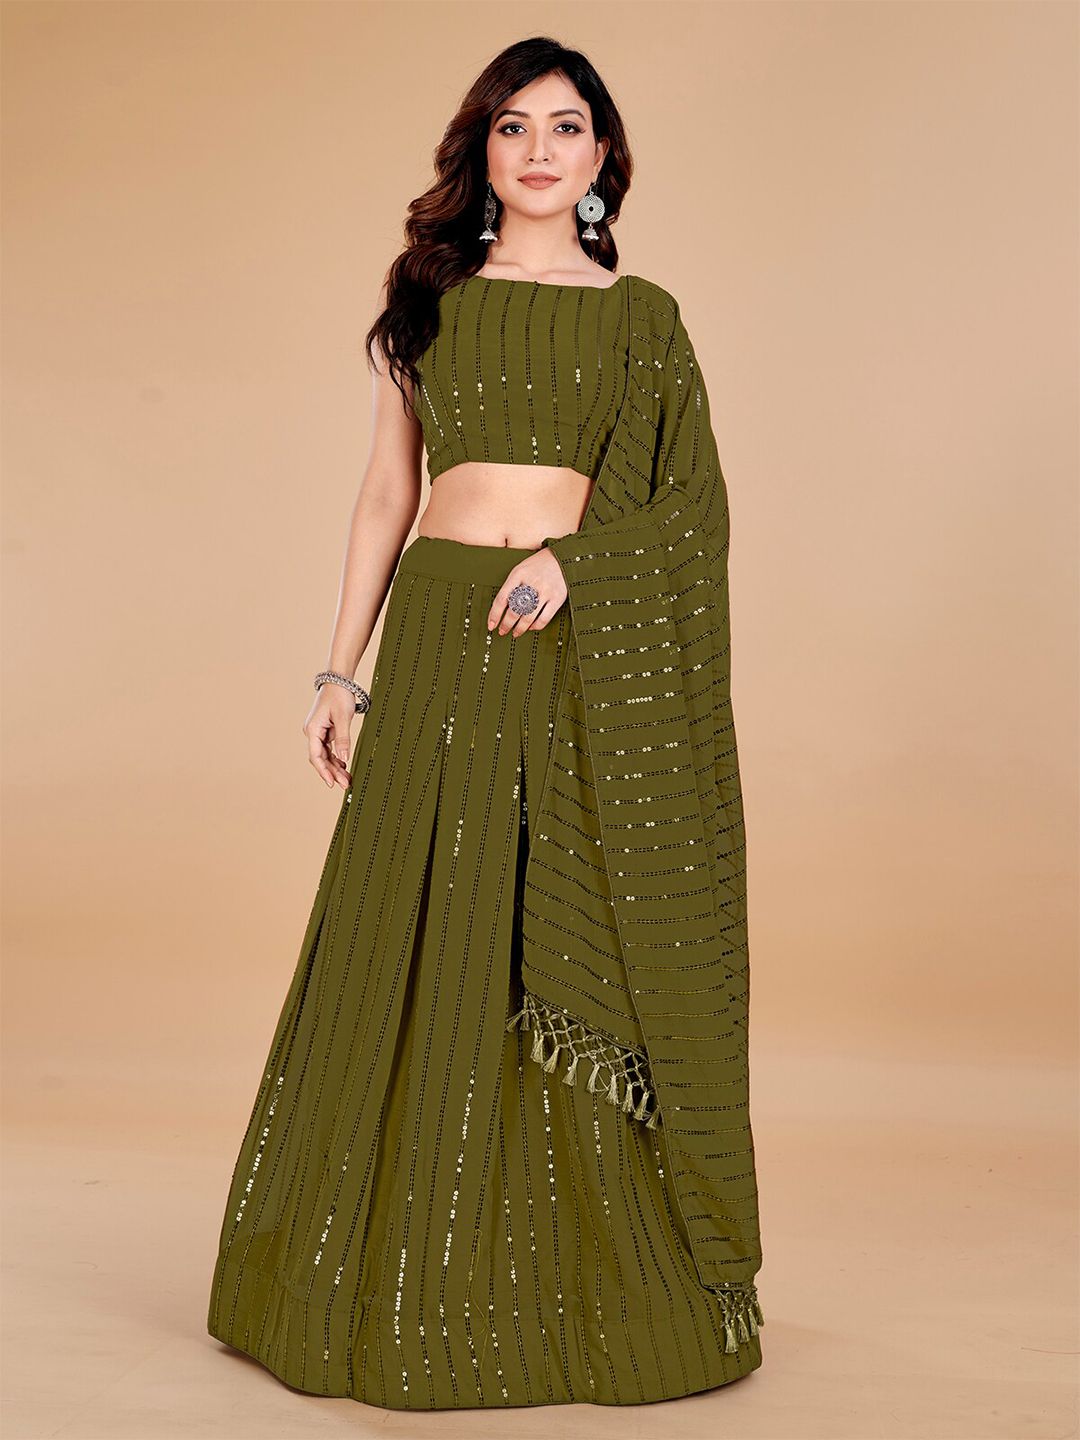 KALINI Embroidered Sequinned Semi-Stitched Georgette Lehenga Choli With Dupatta Price in India